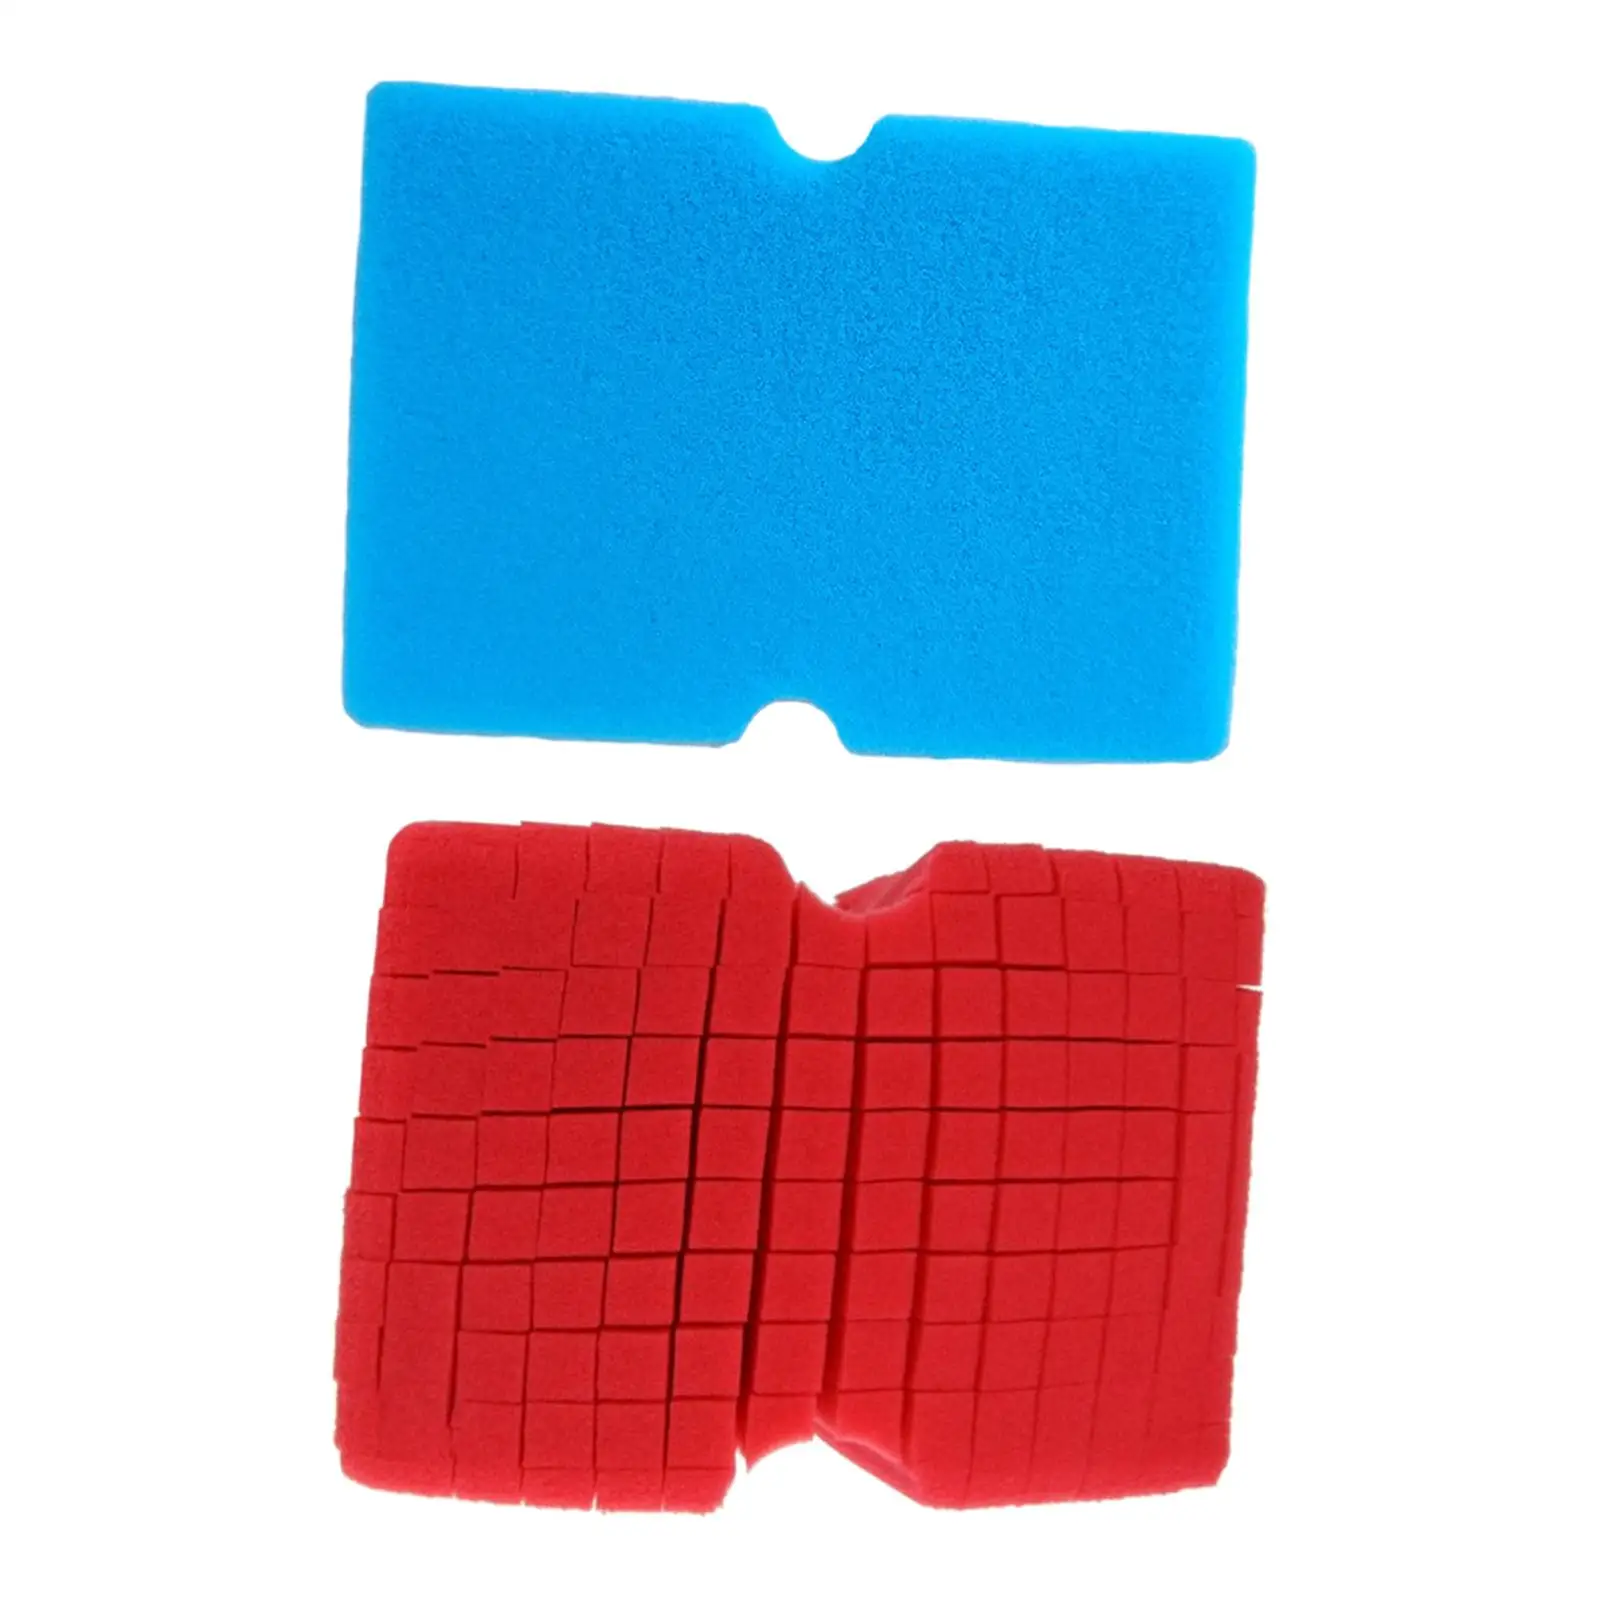 Pva Sponge, Car Household Cleaning Sponge,  Water Absorbing Car Cleaning Accessories for Trucks Bathtub, Water Games, Furniture